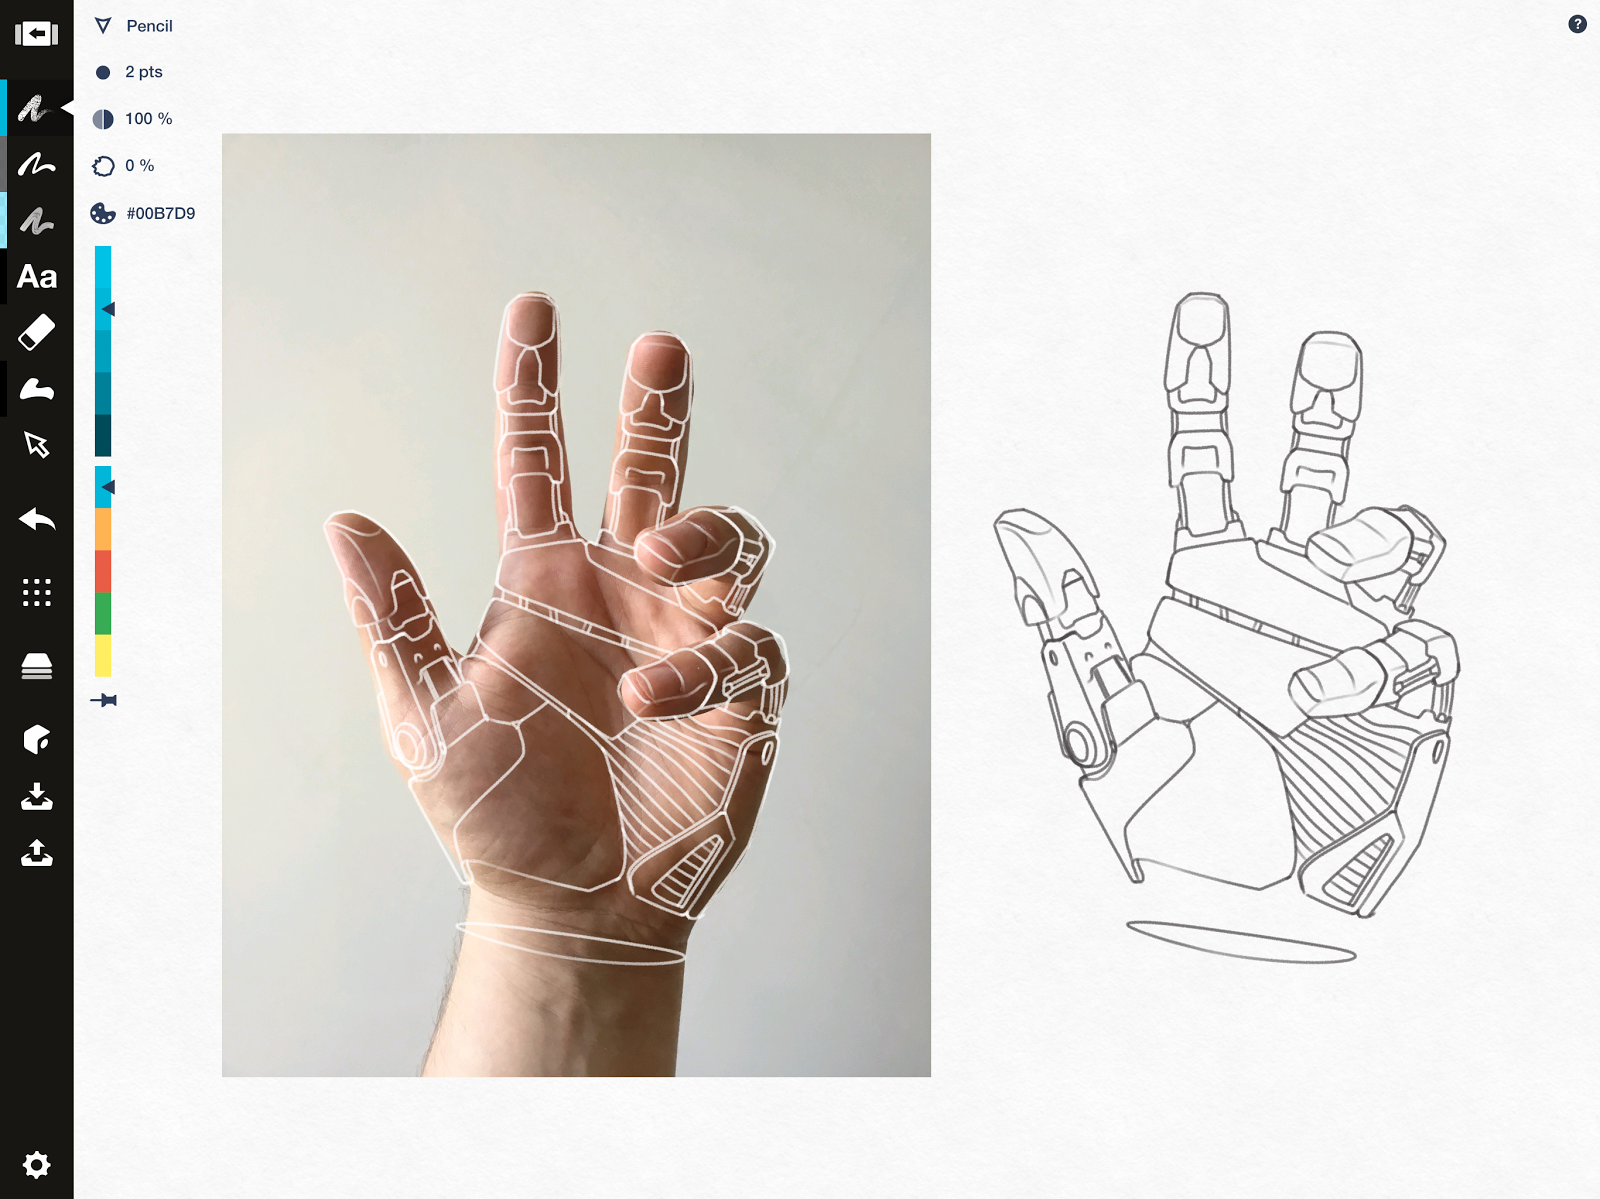 Draw Your Own Hand This Article Was Adapted From Our Free By Concepts App Medium